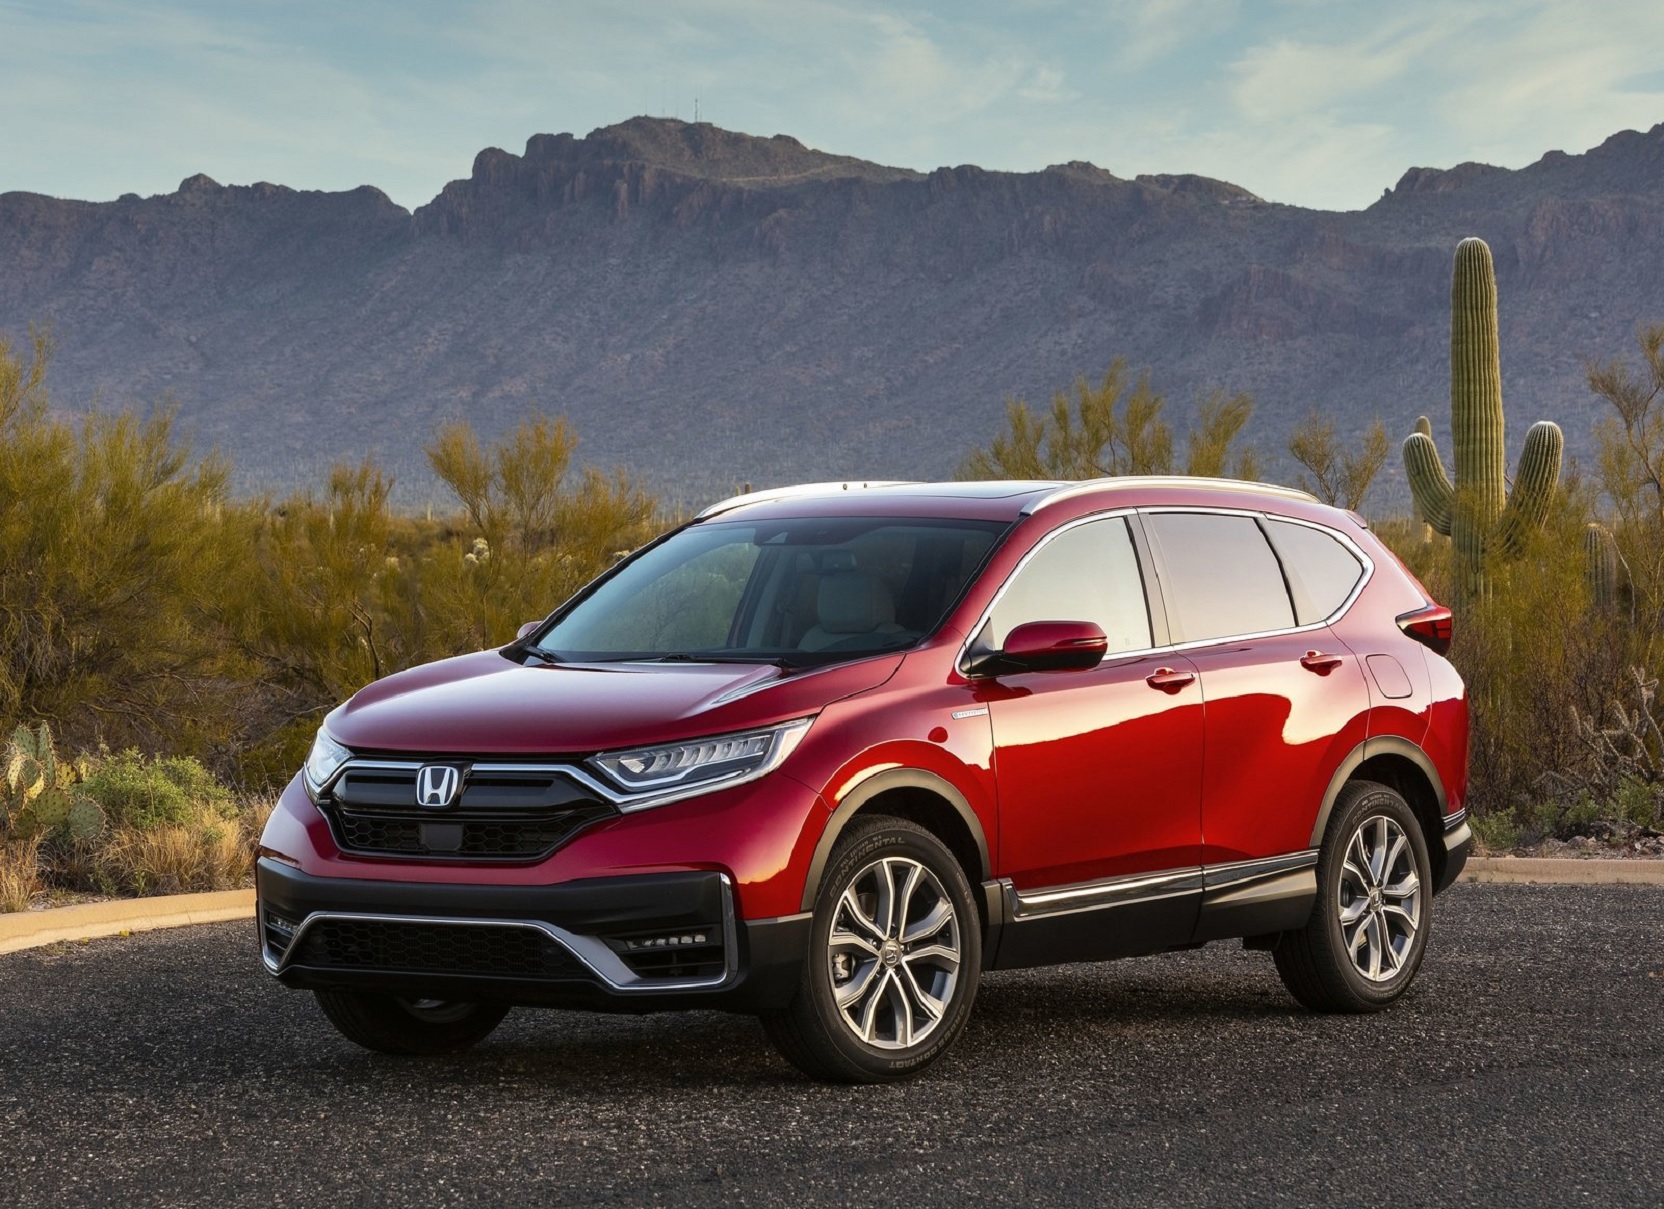 The 2021 Honda CR-V Is the Most Comfortable Compact SUV According to ...